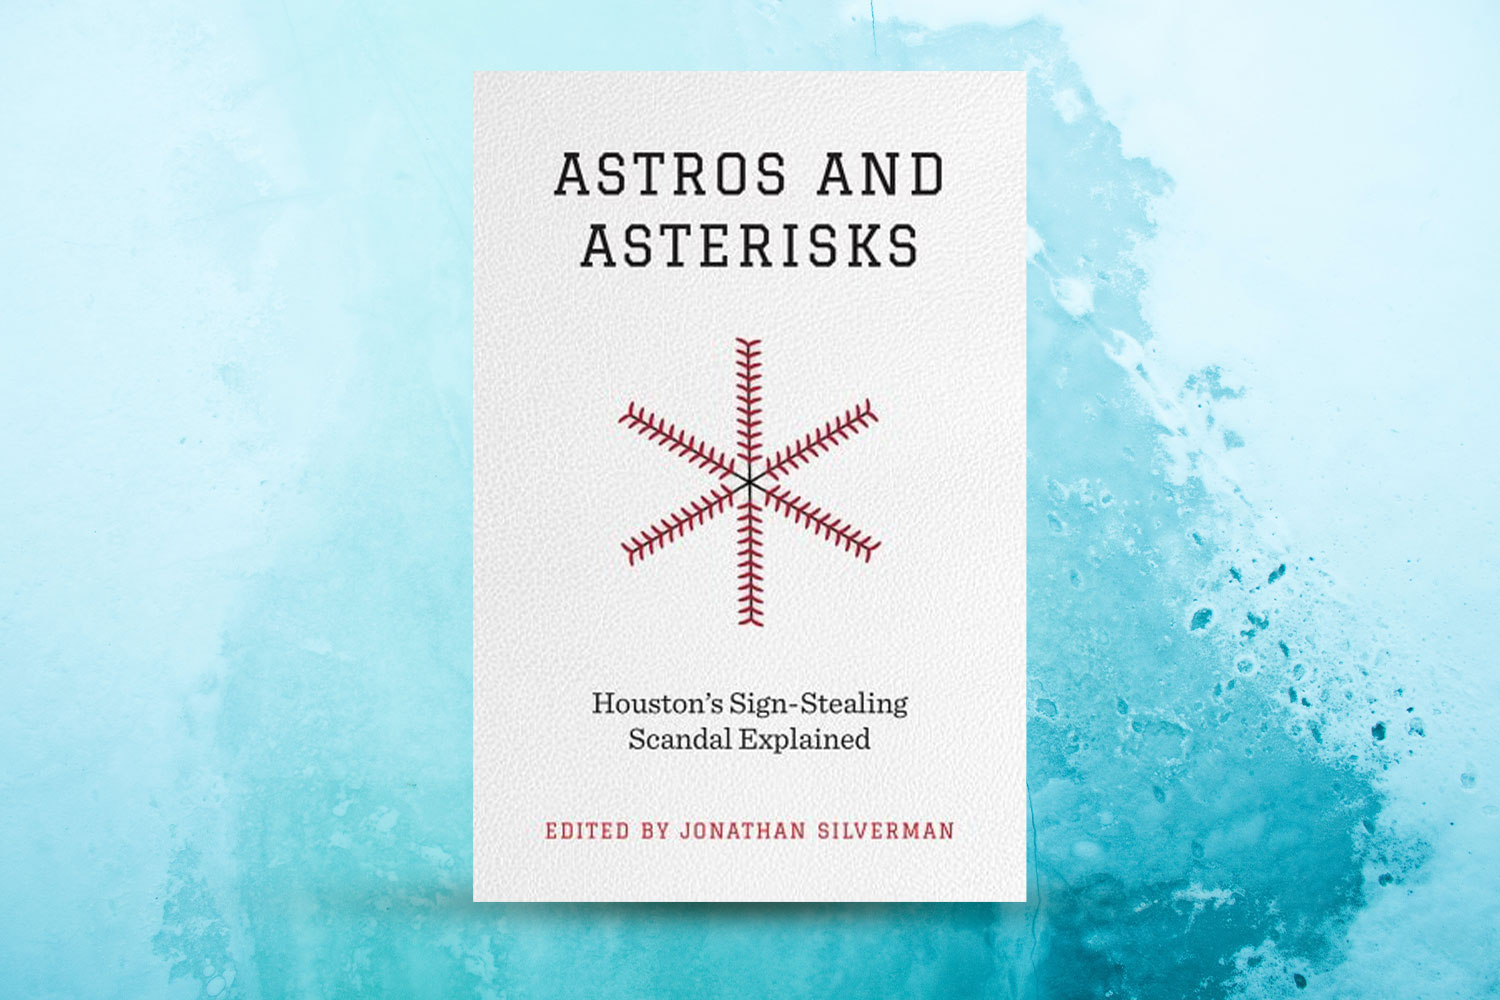 "Astros and Asterisks" cover